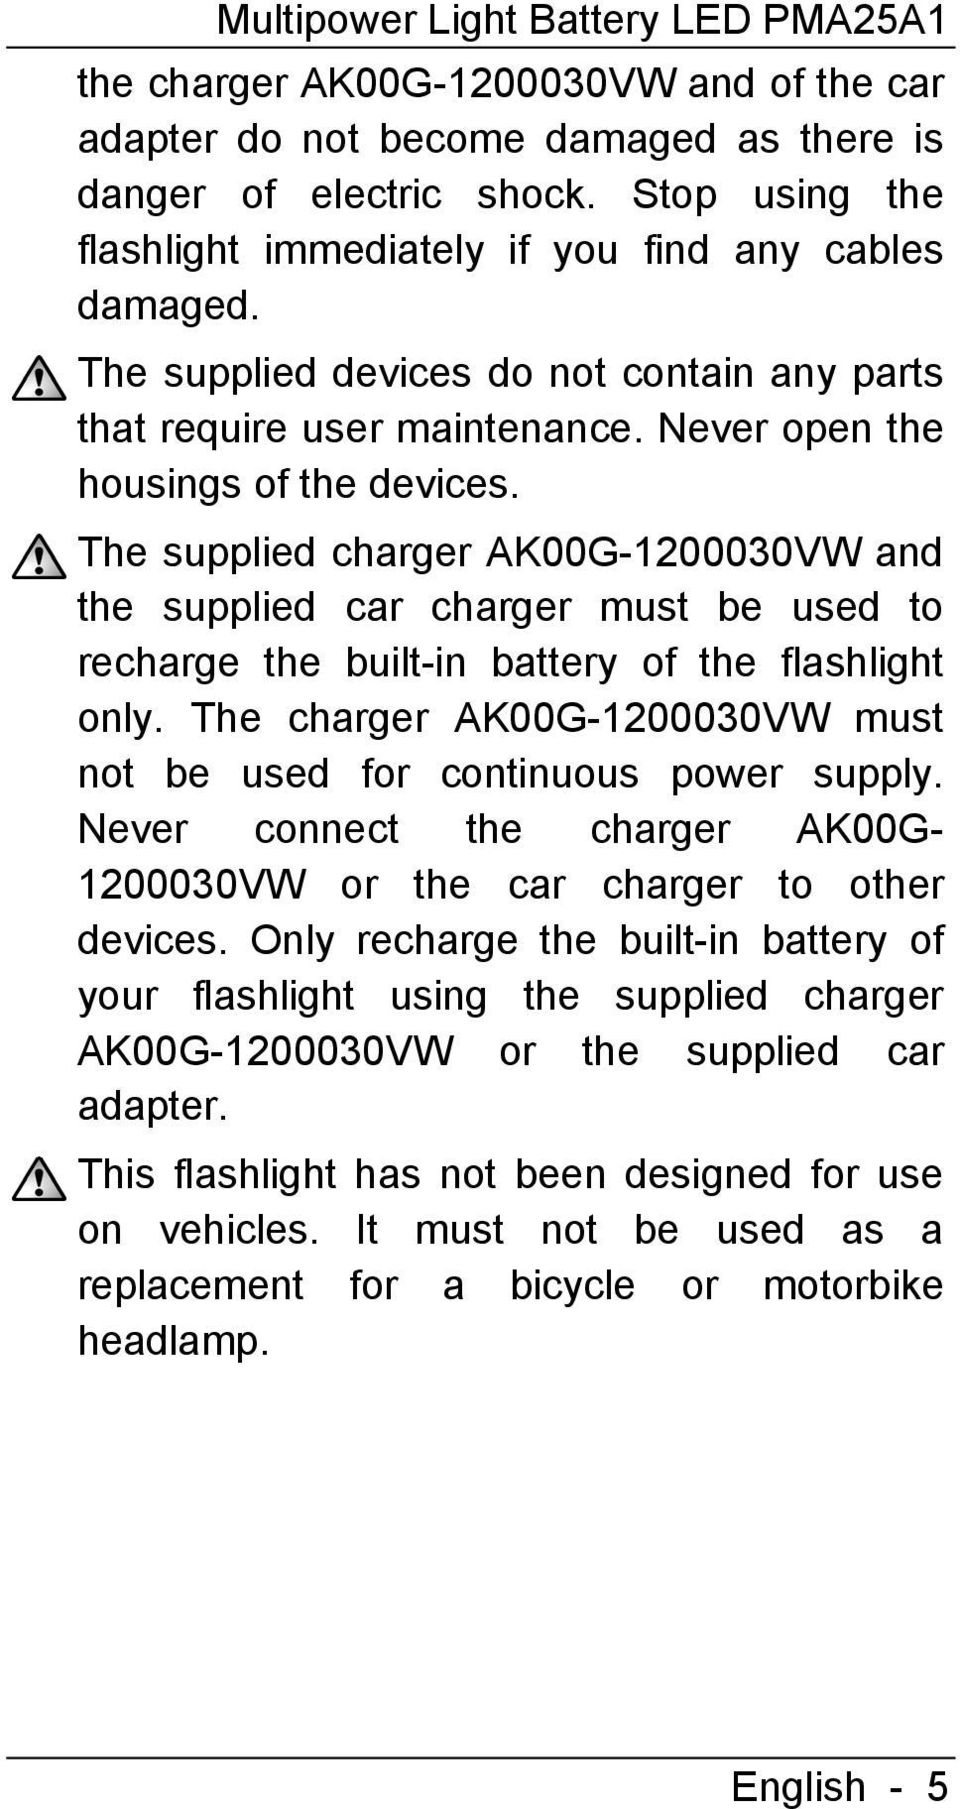 The supplied charger AK00G-1200030VW and the supplied car charger must be used to recharge the built-in battery of the flashlight only.